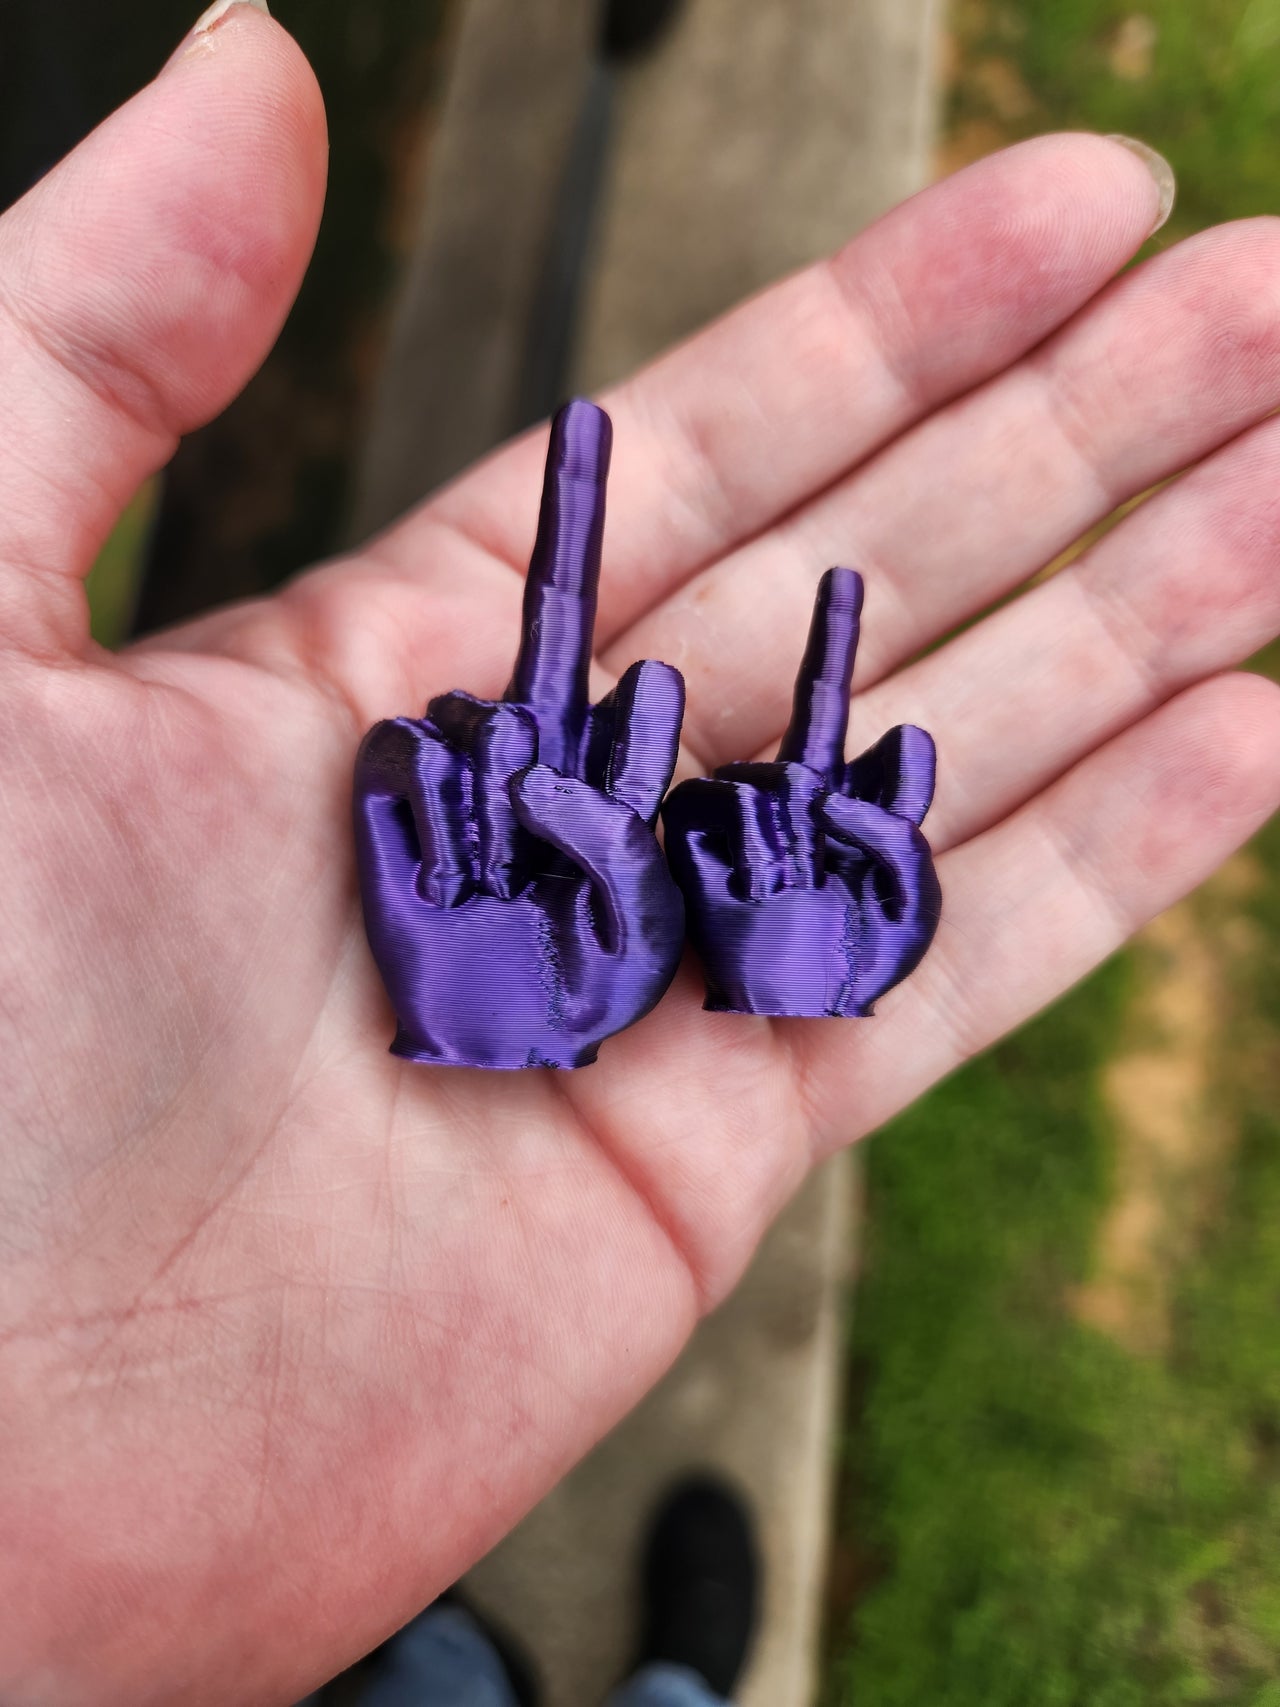 3D Printed Middle Finger Tire Caps